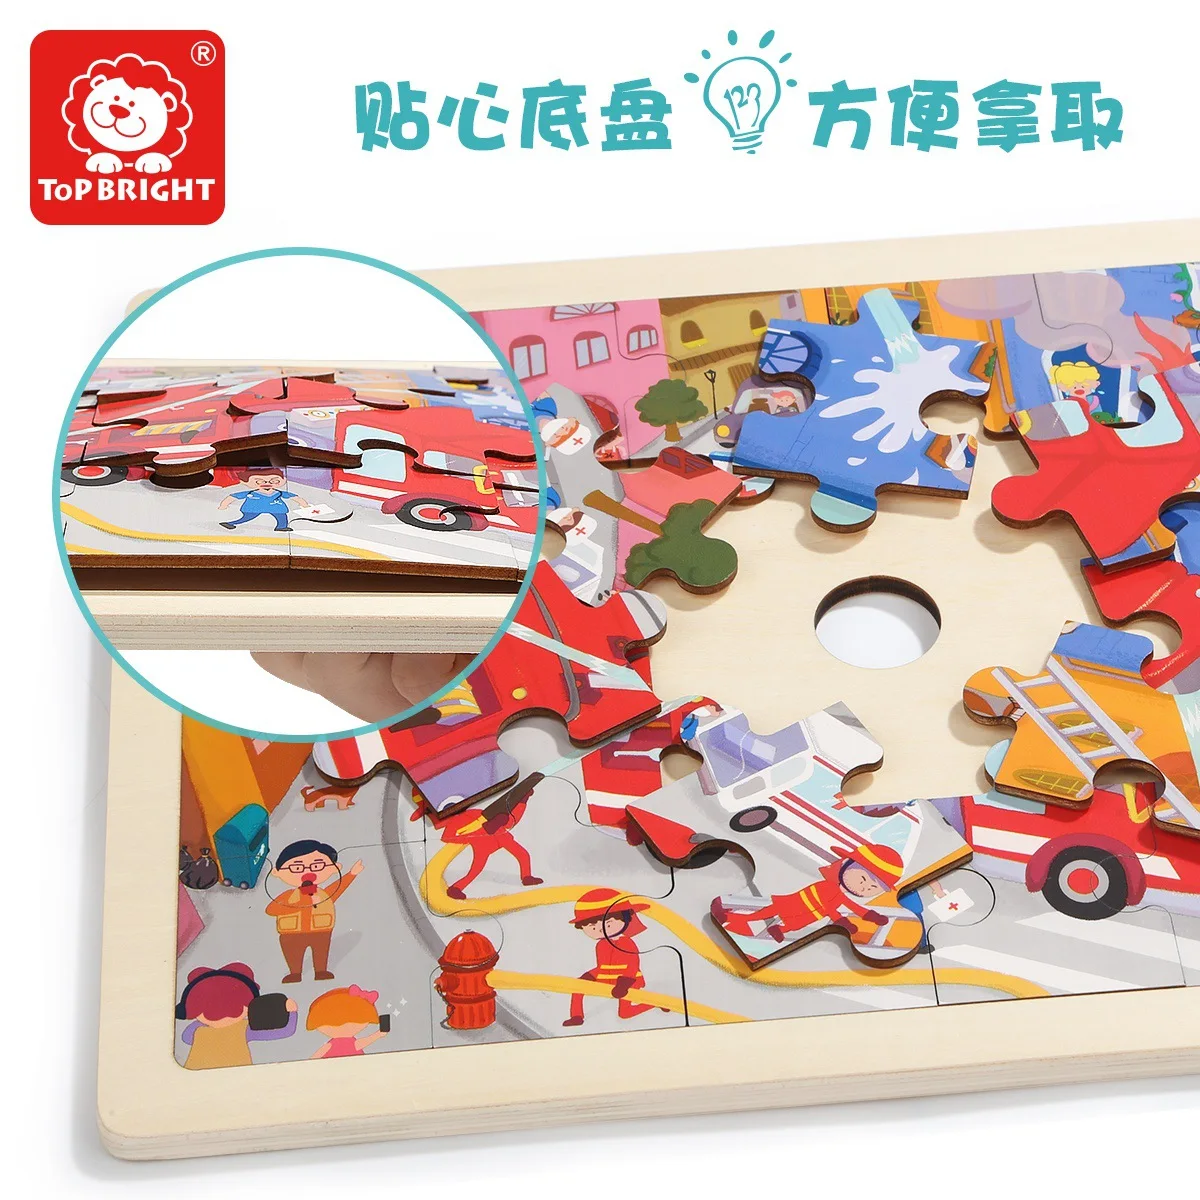 

Wooden Toys Puzzle Travel Games Smart Shapes Brain Teaser Logic Kids Learning Toys Educational Puzzle Juguetes Toys Games DB60PT